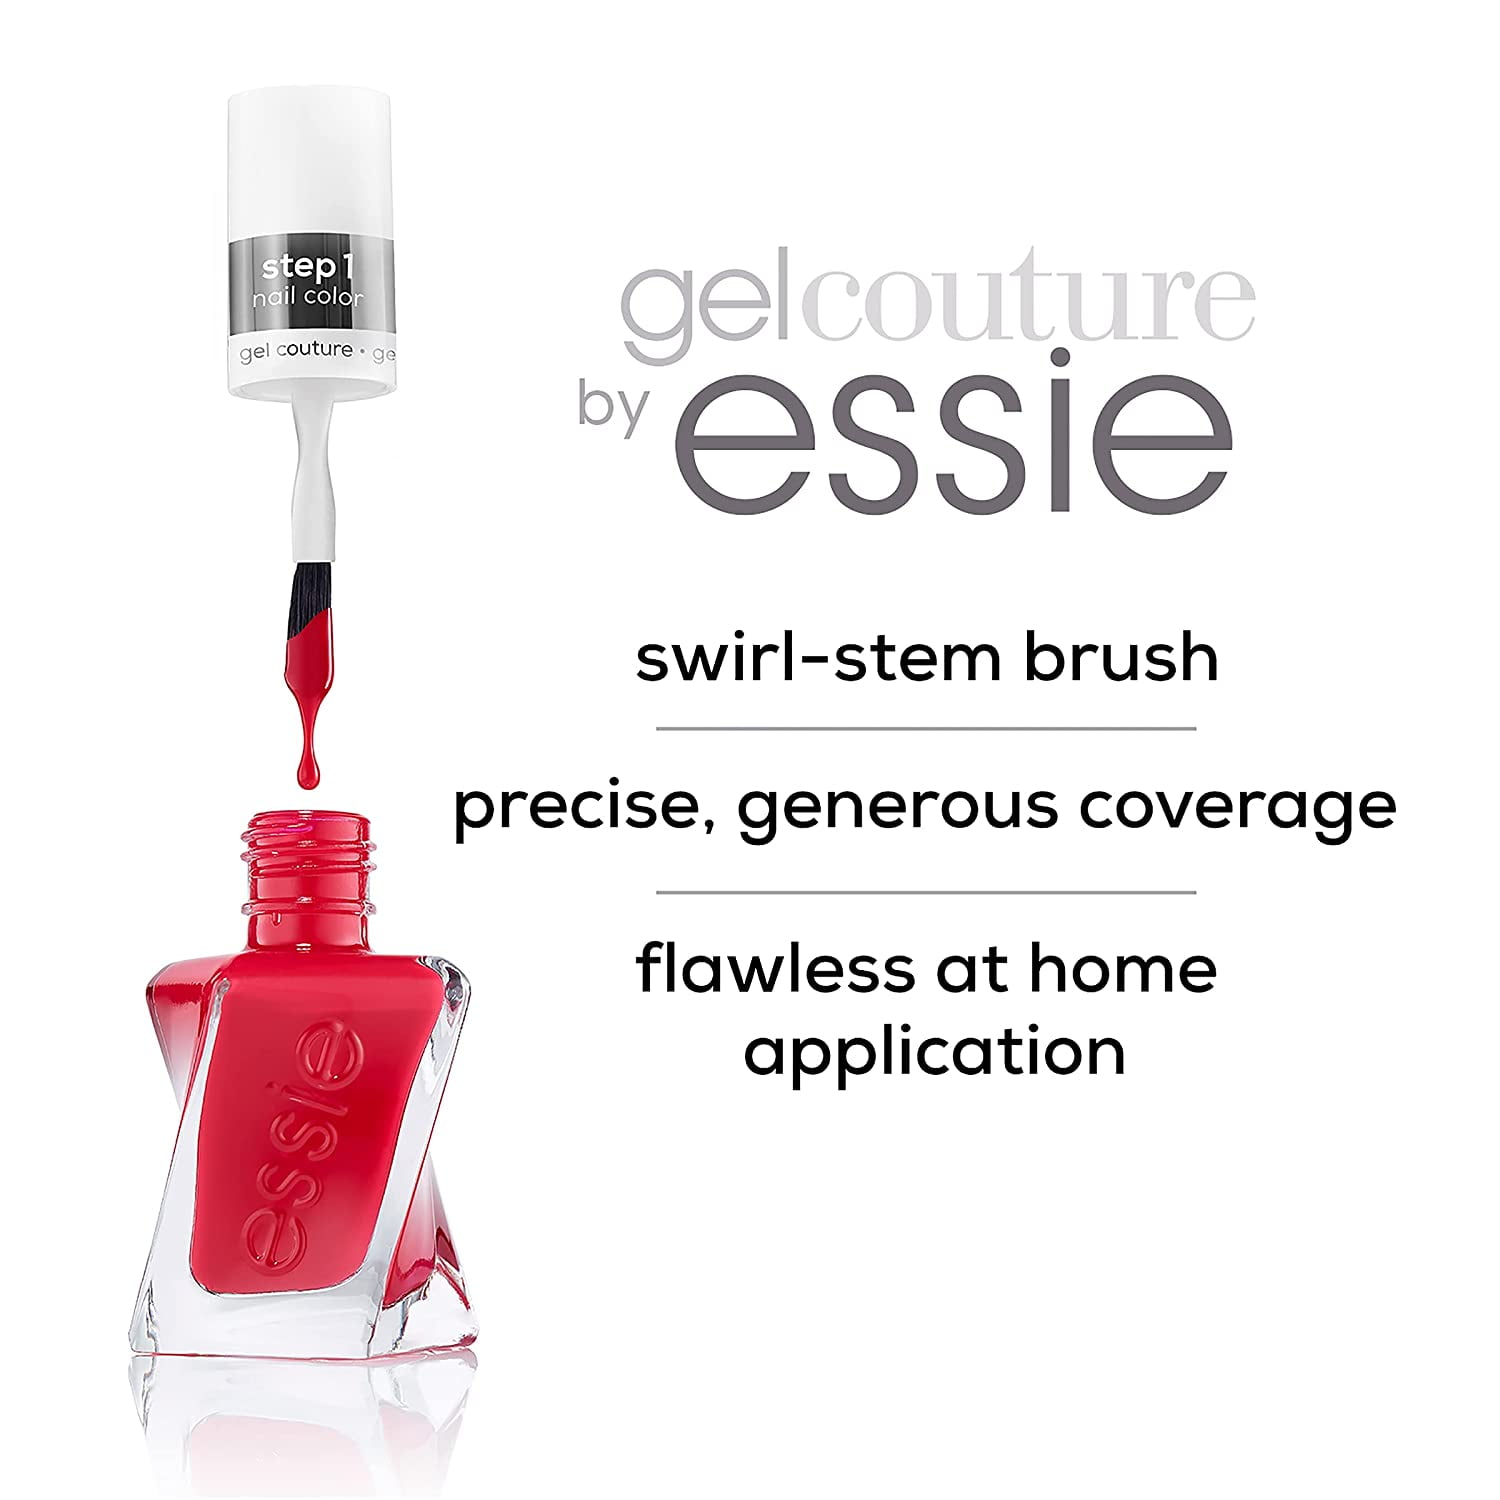 Essie gel couture new color coat,, sellers kit couture pre-show piece featuring set, mini the longwear 3 and top holiday 1 gel edition limited best - nail rock jitters, runway, gift